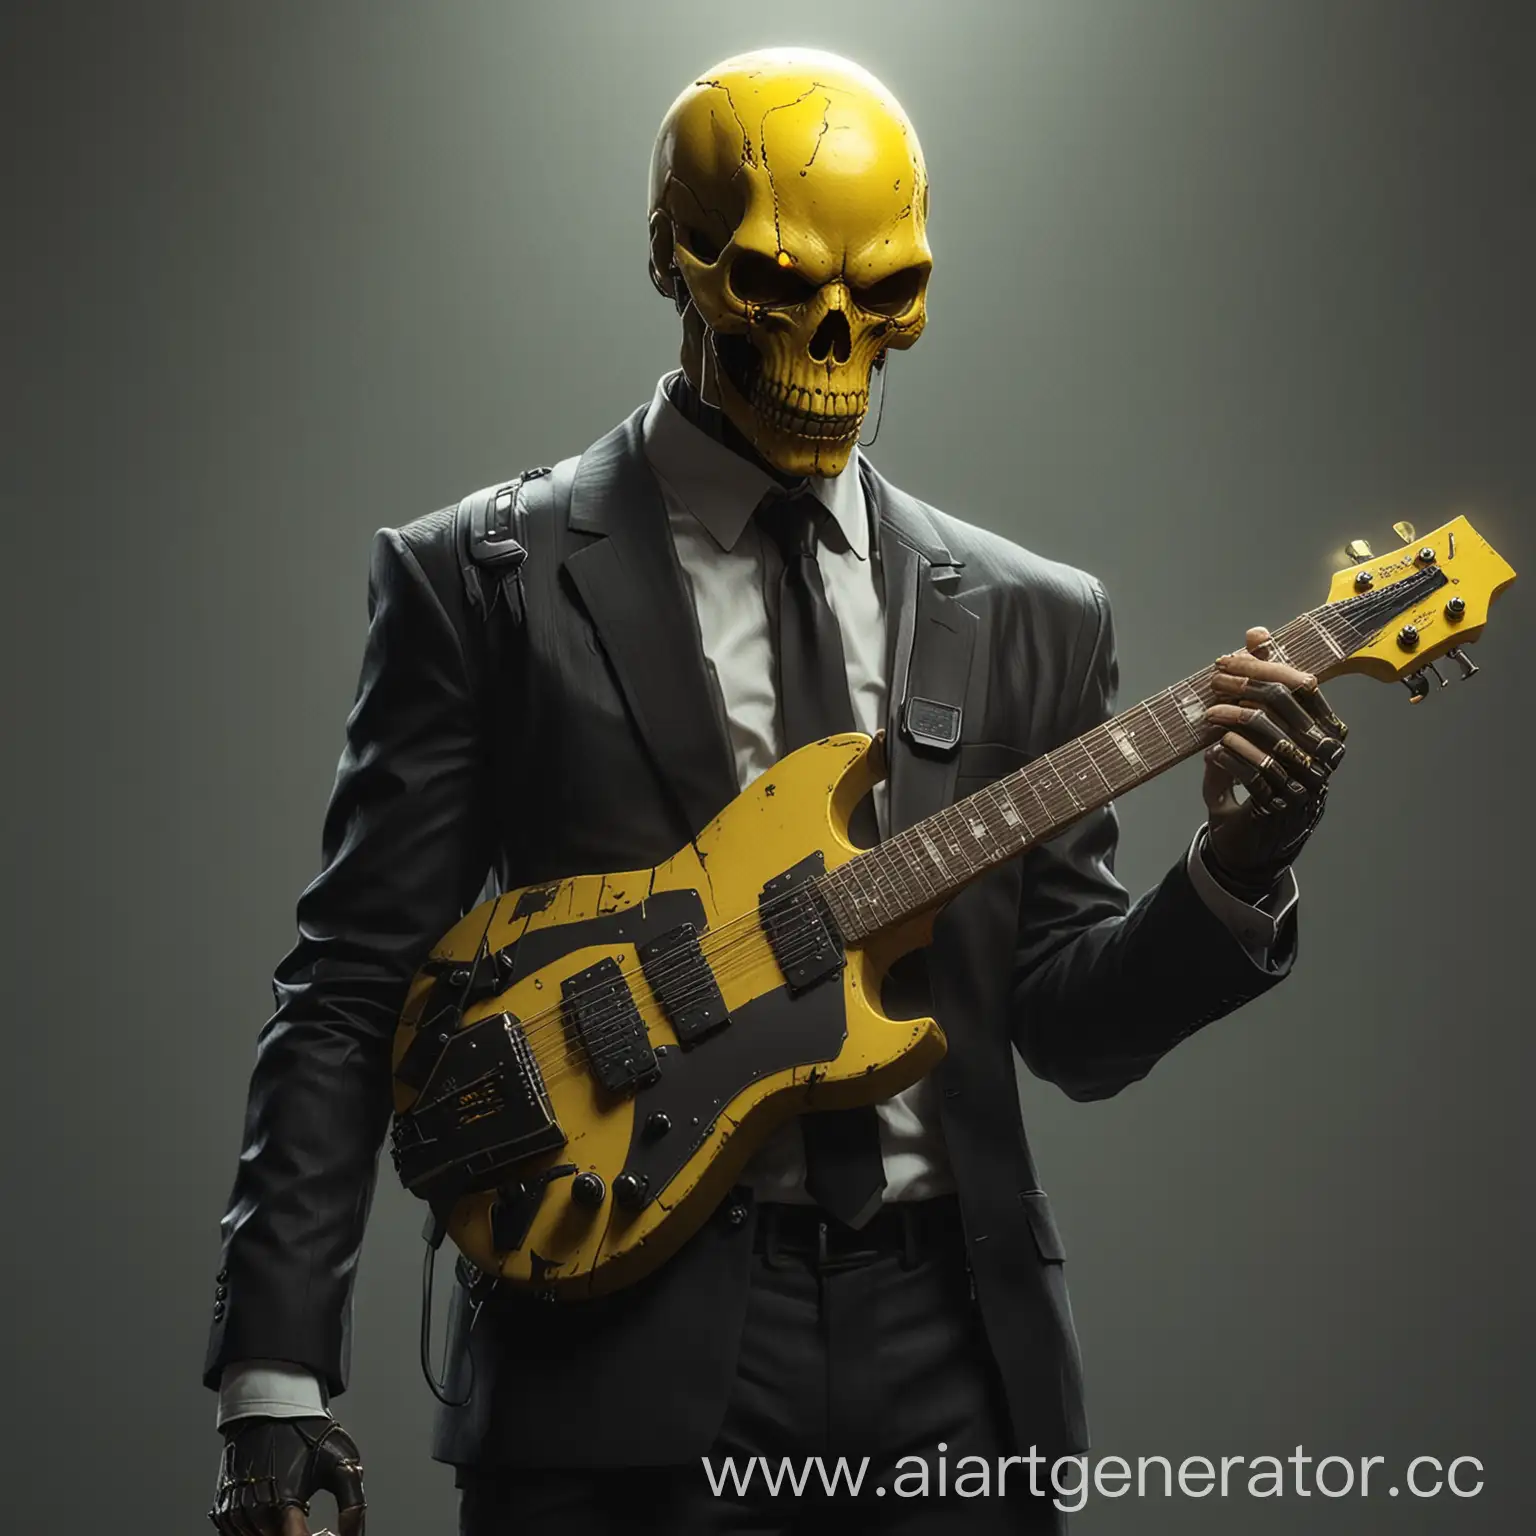 Cyberpunk-Businessman-with-Yellow-Skull-Implant-Playing-Electric-Guitar